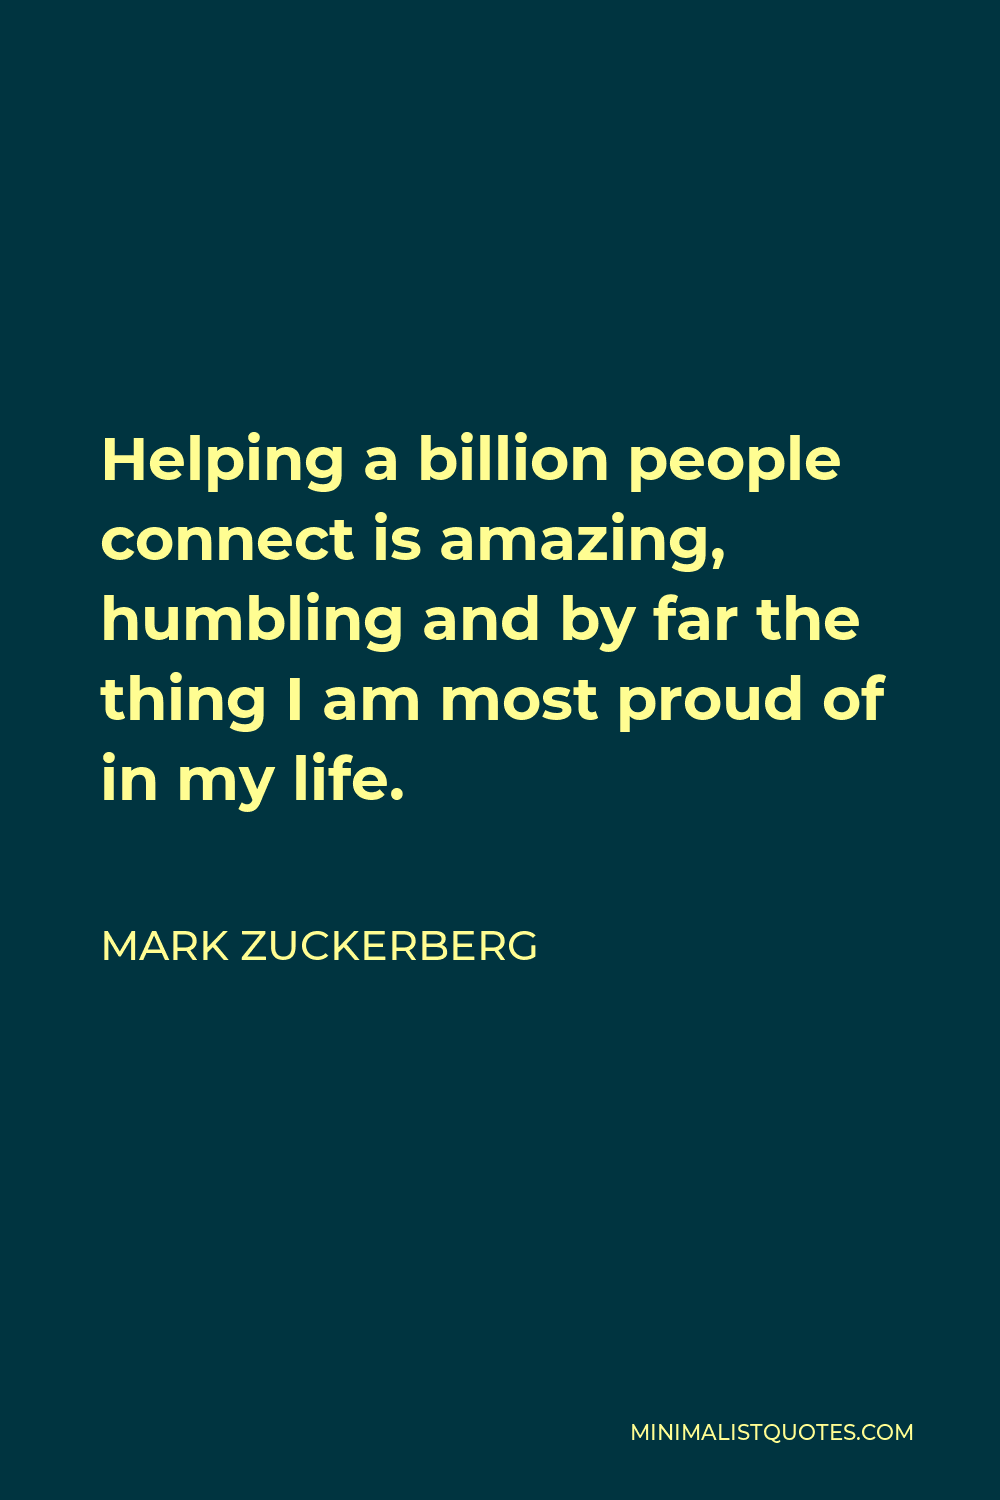 Mark Zuckerberg Quote - Helping a billion people connect is amazing, humbling and by far the thing I am most proud of in my life.